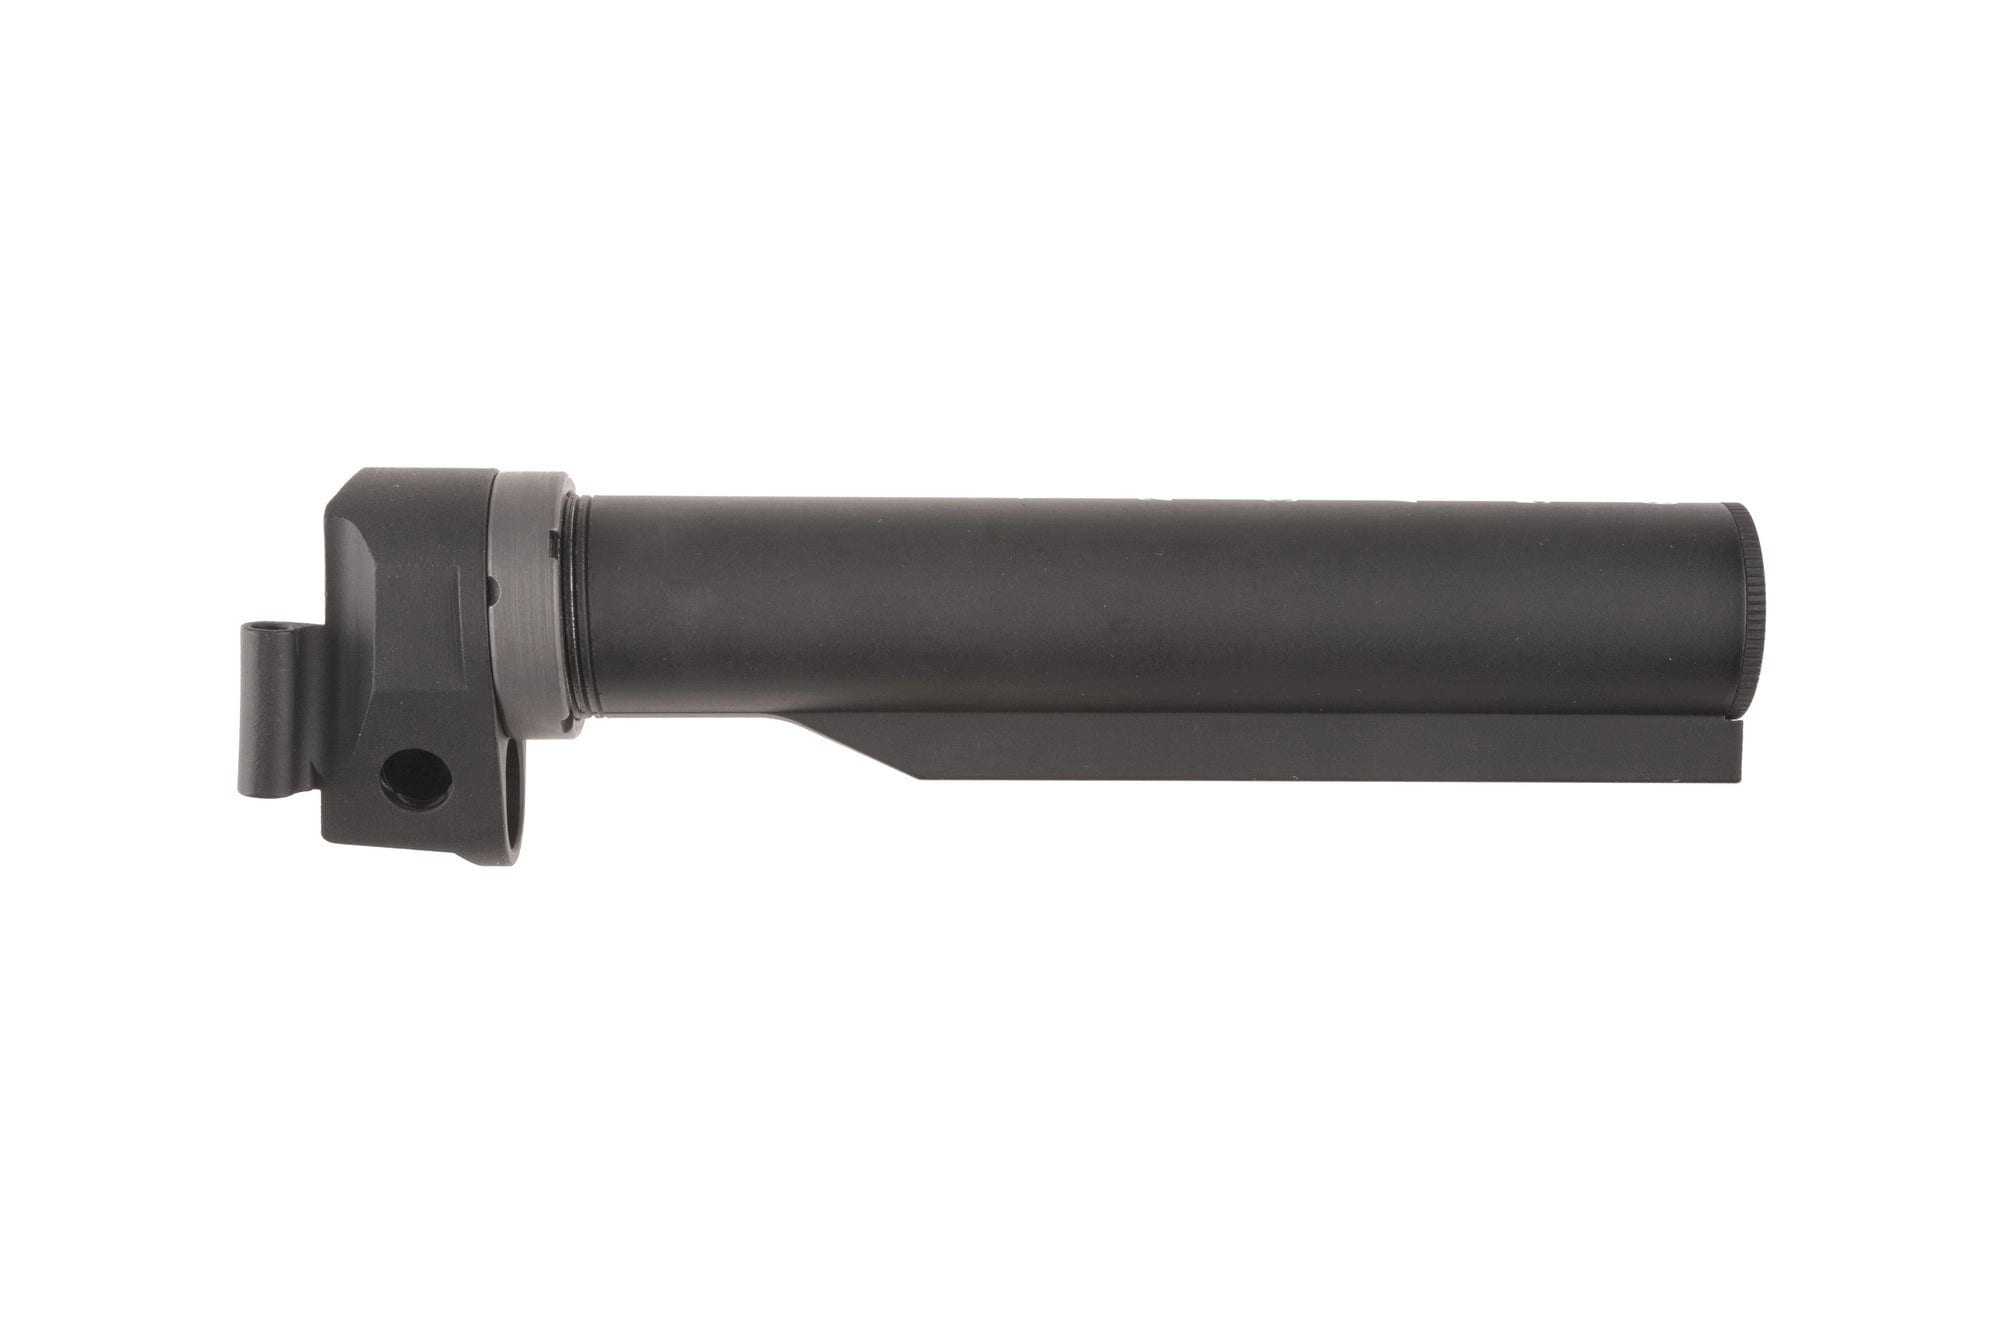 M4 stock Adapter for AKS-74